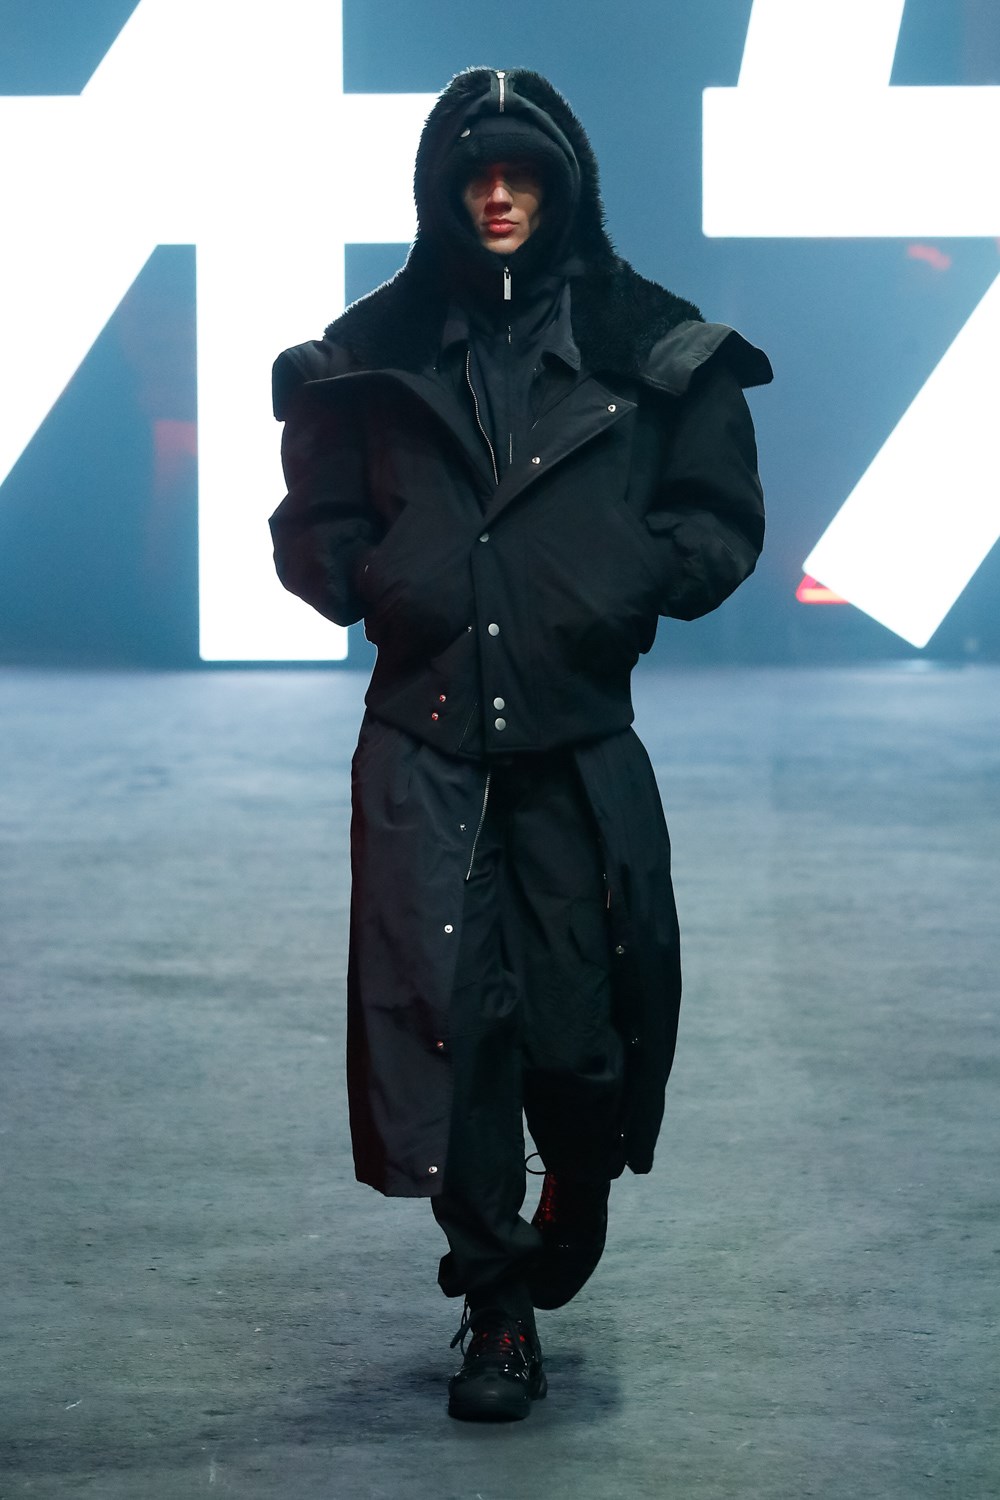 44 Label Group Fall 2022 Men’s Fashion Show | The Impression